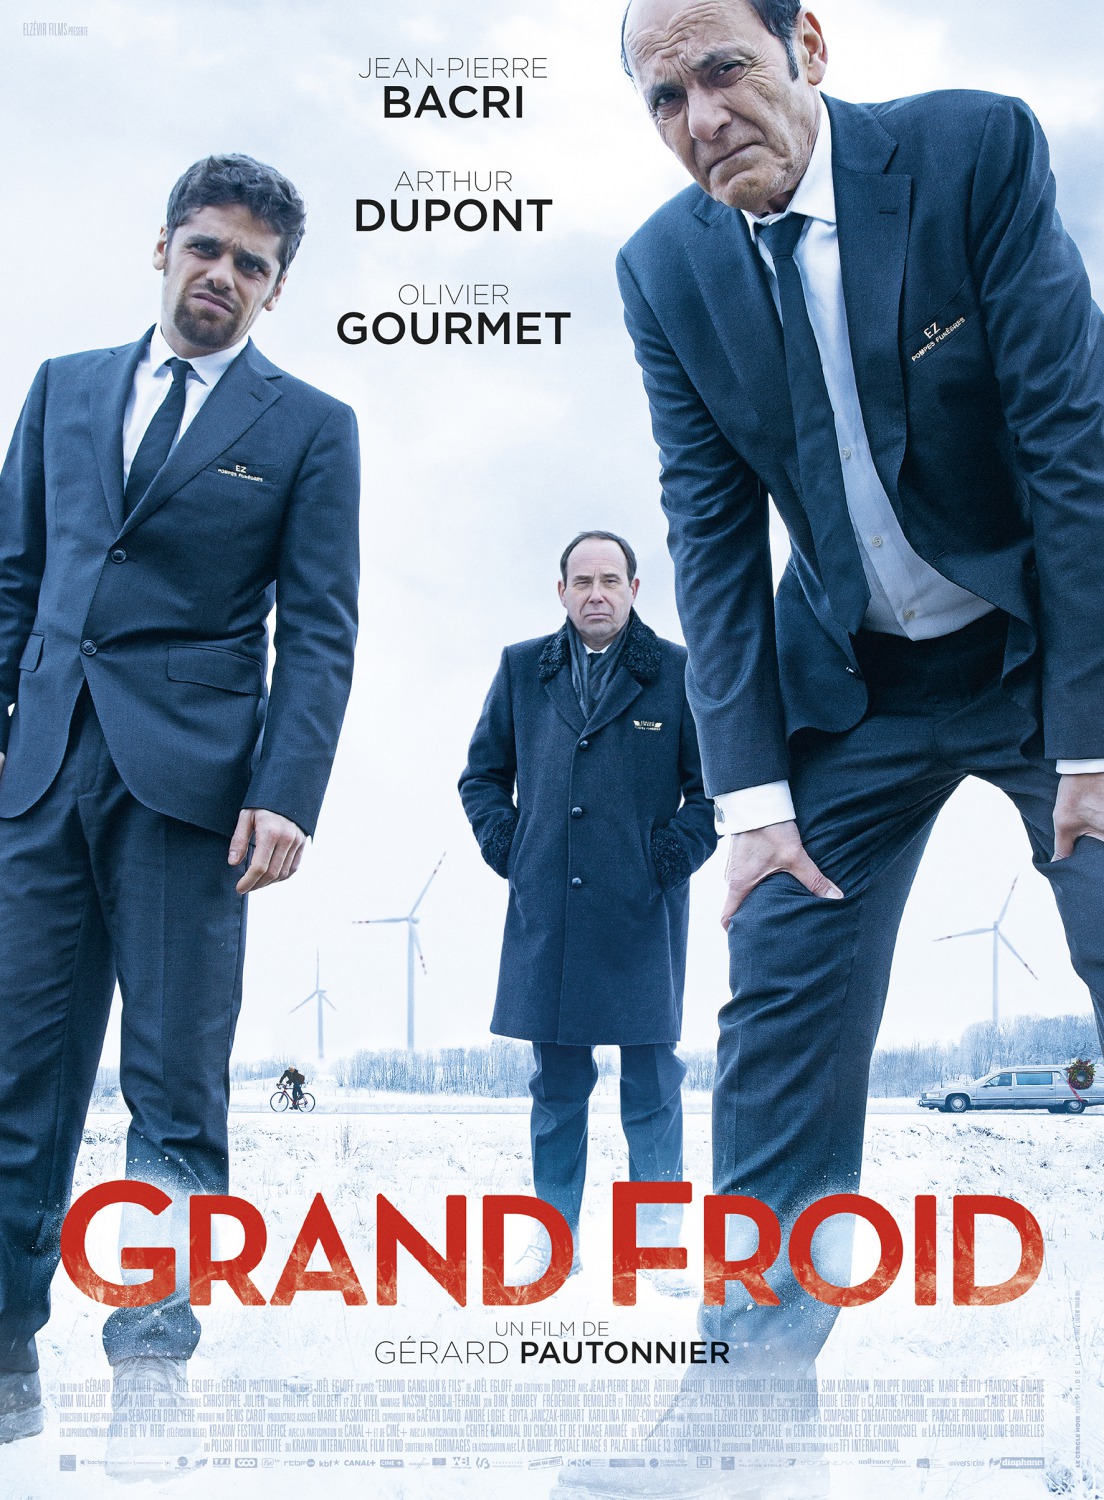 Extra Large Movie Poster Image for Grand froid 